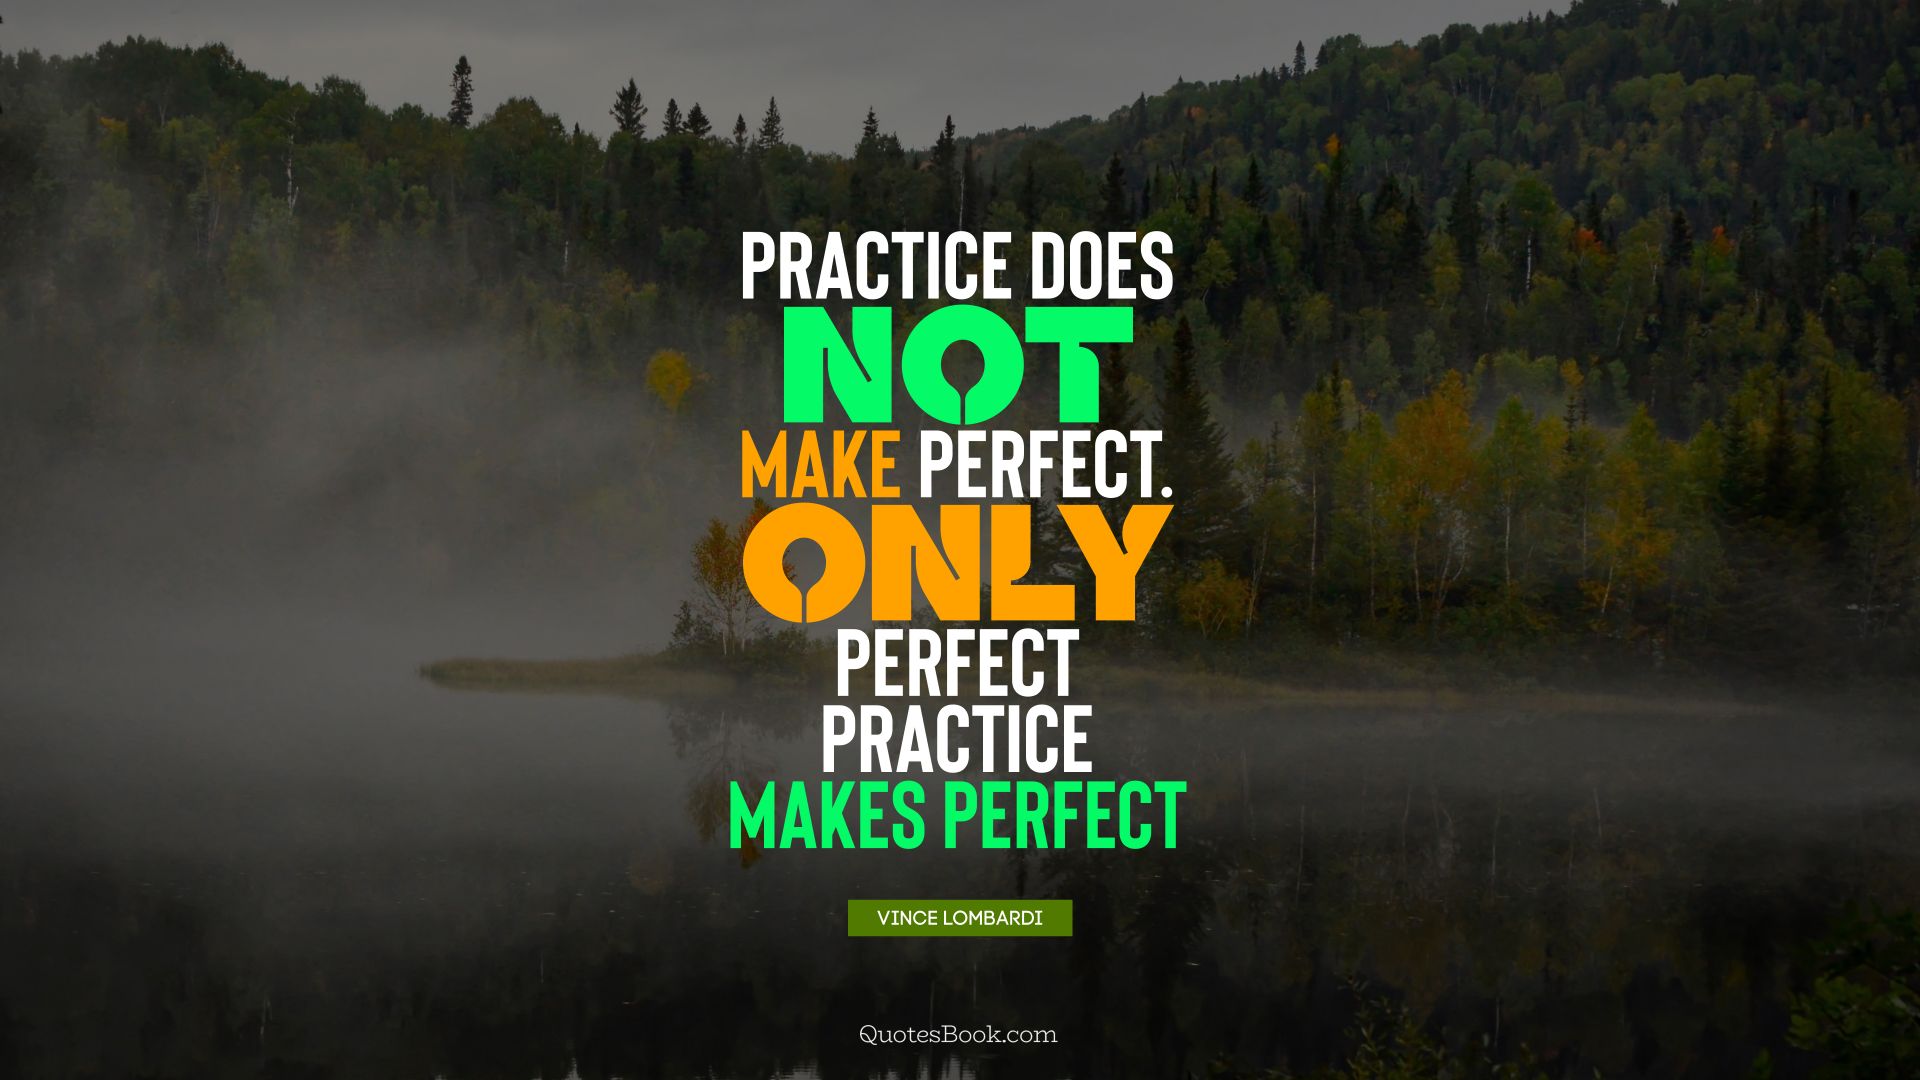 Practice does not make perfect. Only perfect practice makes perfect. - Quote by Vince Lombardi